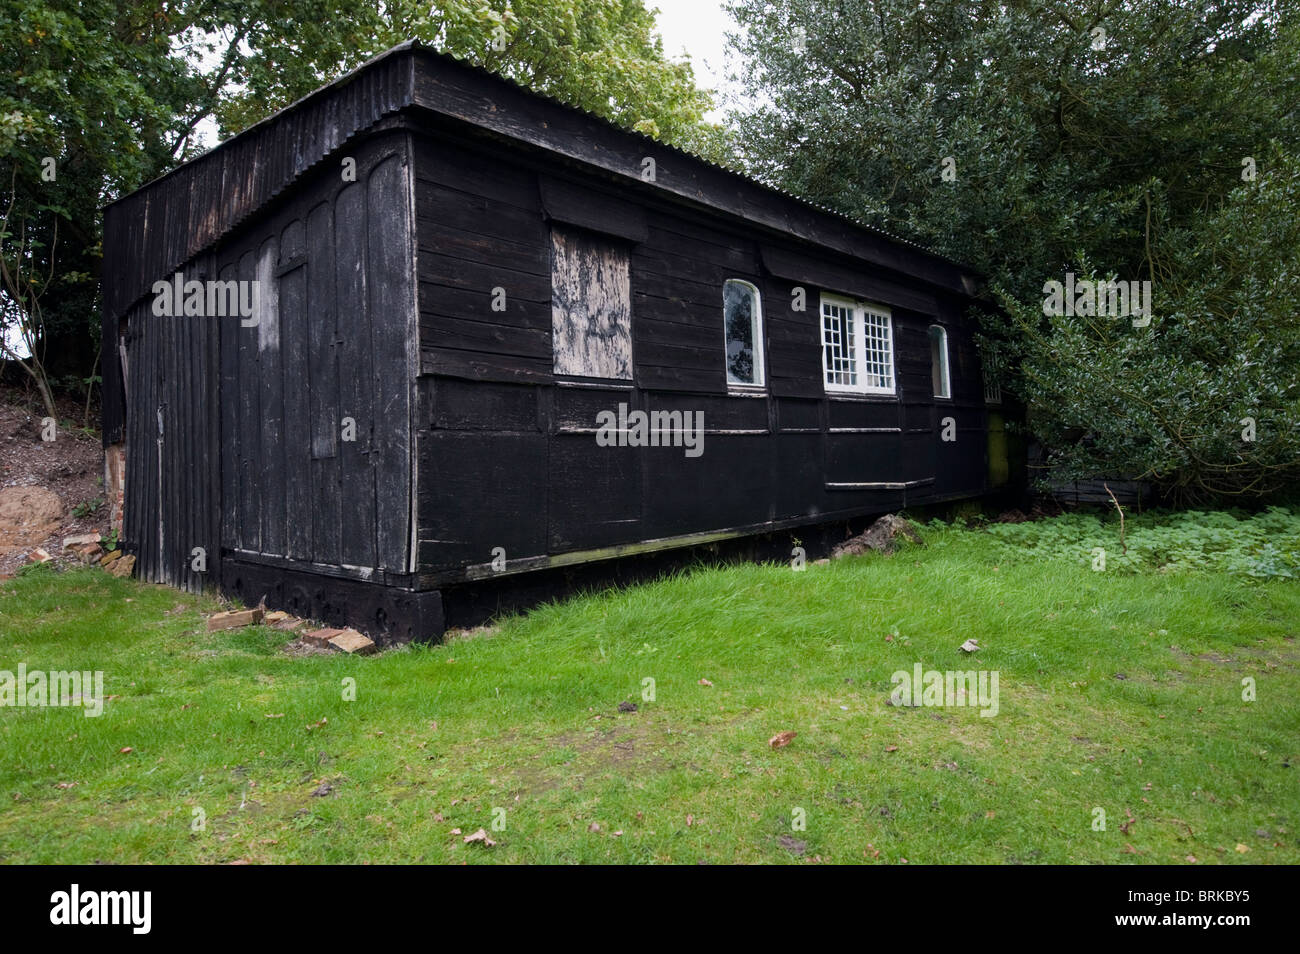 Old railway carriage conversion in the village of Westleton, Suffolk. Stock Photo